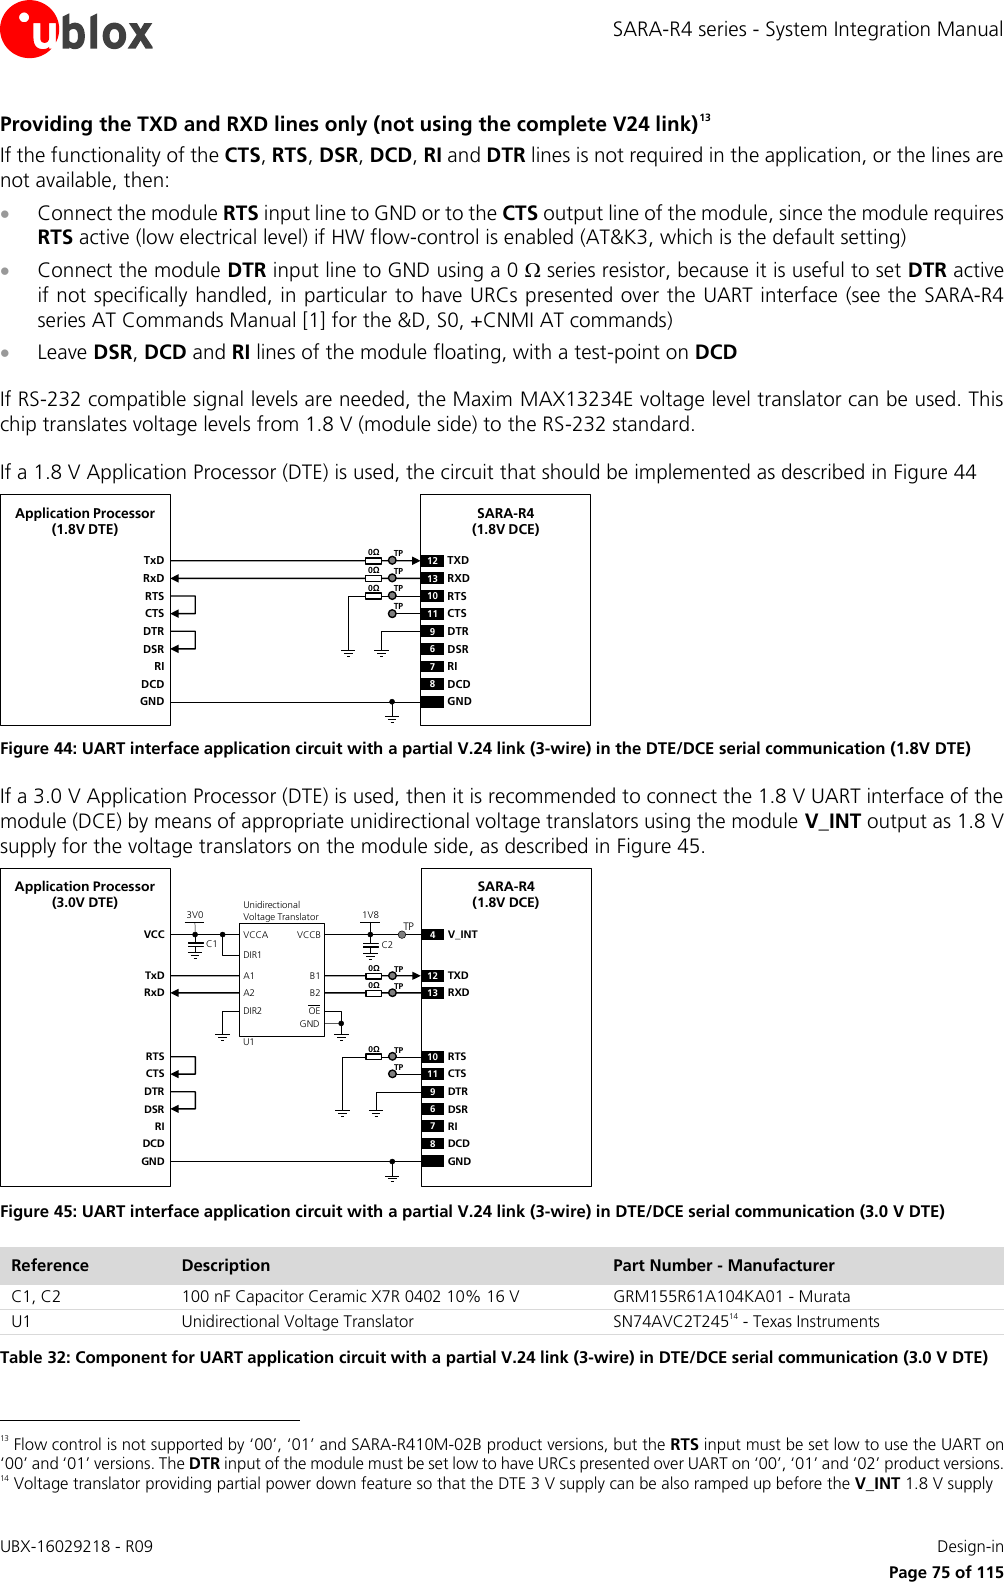 SARA-R4 series - System Integration Manual UBX-16029218 - R09    Design-in     Page 75 of 115 Providing the TXD and RXD lines only (not using the complete V24 link)13 If the functionality of the CTS, RTS, DSR, DCD, RI and DTR lines is not required in the application, or the lines are not available, then:  Connect the module RTS input line to GND or to the CTS output line of the module, since the module requires RTS active (low electrical level) if HW flow-control is enabled (AT&amp;K3, which is the default setting)  Connect the module DTR input line to GND using a 0  series resistor, because it is useful to set DTR active if not specifically handled, in particular to have URCs presented over the UART interface (see the SARA-R4 series AT Commands Manual [1] for the &amp;D, S0, +CNMI AT commands)  Leave DSR, DCD and RI lines of the module floating, with a test-point on DCD  If RS-232 compatible signal levels are needed, the Maxim MAX13234E voltage level translator can be used. This chip translates voltage levels from 1.8 V (module side) to the RS-232 standard.   If a 1.8 V Application Processor (DTE) is used, the circuit that should be implemented as described in Figure 44 TxDApplication Processor(1.8V DTE)RxDRTSCTSDTRDSRRIDCDGNDSARA-R4(1.8V DCE)12 TXD9DTR13 RXD10 RTS11 CTS6DSR7RI8DCDGND0ΩTP0ΩTP0ΩTPTP Figure 44: UART interface application circuit with a partial V.24 link (3-wire) in the DTE/DCE serial communication (1.8V DTE) If a 3.0 V Application Processor (DTE) is used, then it is recommended to connect the 1.8 V UART interface of the module (DCE) by means of appropriate unidirectional voltage translators using the module V_INT output as 1.8 V supply for the voltage translators on the module side, as described in Figure 45. 4V_INTTxDApplication Processor(3.0V DTE)RxDDTRDSRRIDCDGNDSARA-R4(1.8V DCE)12 TXD9DTR13 RXD6DSR7RI8DCDGND1V8B1 A1GNDU1VCCBVCCAUnidirectionalVoltage TranslatorC1 C23V0DIR1DIR2 OEVCCB2 A2RTSCTS10 RTS11 CTSTP0ΩTP0ΩTP0ΩTPTP Figure 45: UART interface application circuit with a partial V.24 link (3-wire) in DTE/DCE serial communication (3.0 V DTE) Reference Description Part Number - Manufacturer C1, C2 100 nF Capacitor Ceramic X7R 0402 10% 16 V GRM155R61A104KA01 - Murata U1 Unidirectional Voltage Translator SN74AVC2T24514 - Texas Instruments Table 32: Component for UART application circuit with a partial V.24 link (3-wire) in DTE/DCE serial communication (3.0 V DTE)                                                       13 Flow control is not supported by ‘00’, ‘01’ and SARA-R410M-02B product versions, but the RTS input must be set low to use the UART on ‘00’ and ‘01’ versions. The DTR input of the module must be set low to have URCs presented over UART on ‘00’, ‘01’ and ‘02’ product versions. 14 Voltage translator providing partial power down feature so that the DTE 3 V supply can be also ramped up before the V_INT 1.8 V supply 